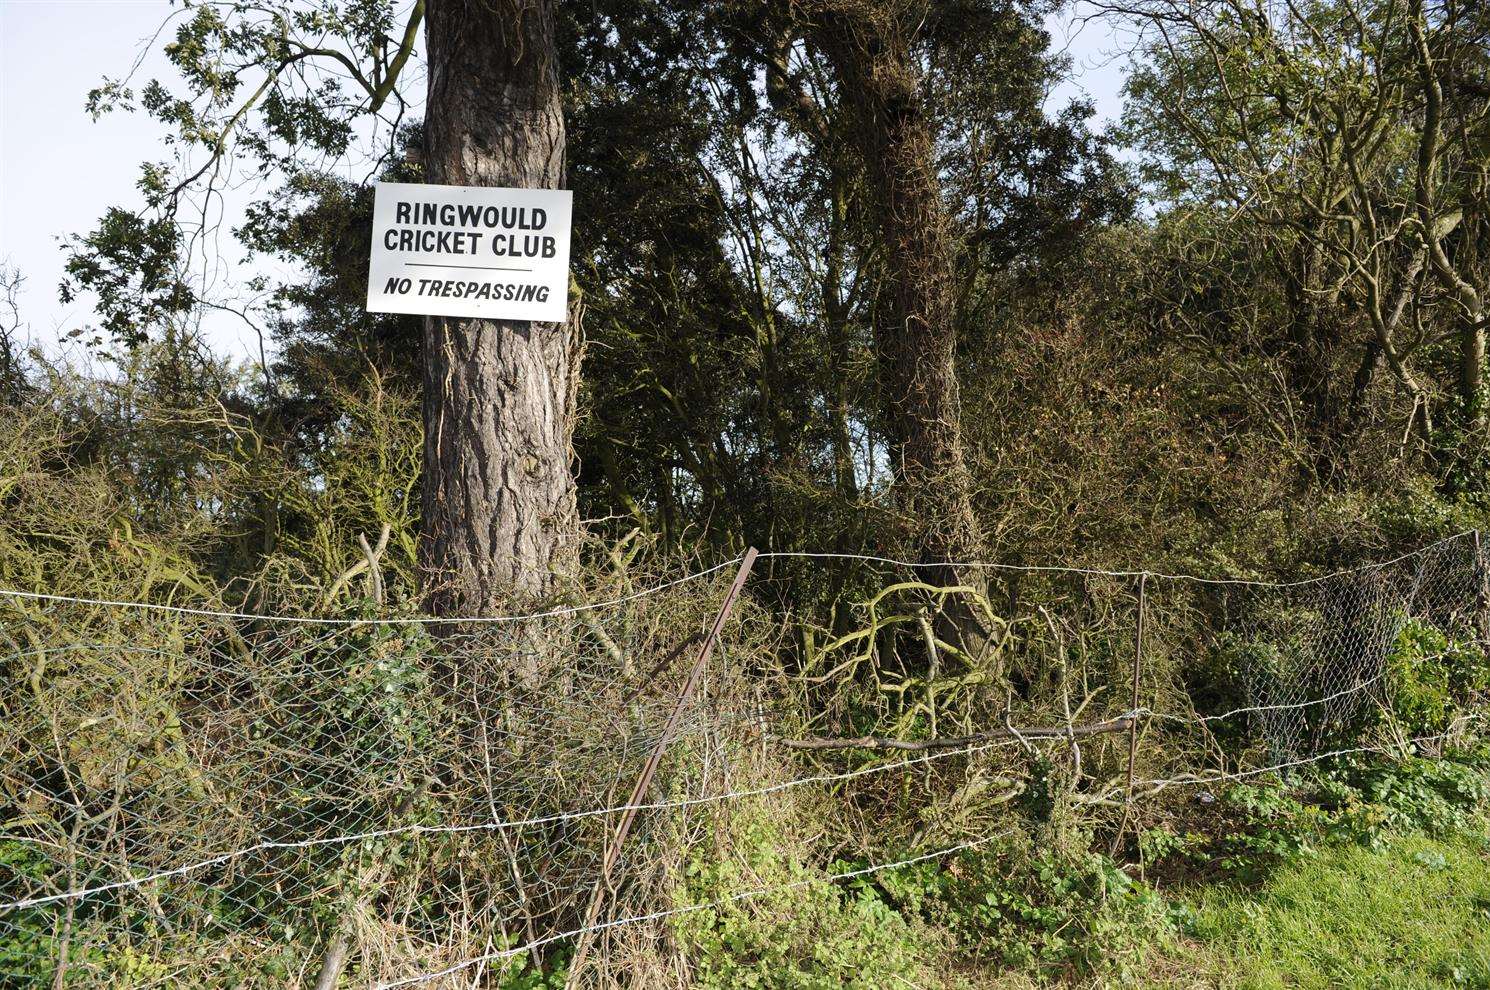 This sign and the barbed wire around TG Claymore's section of the wood caused consternation among wood users